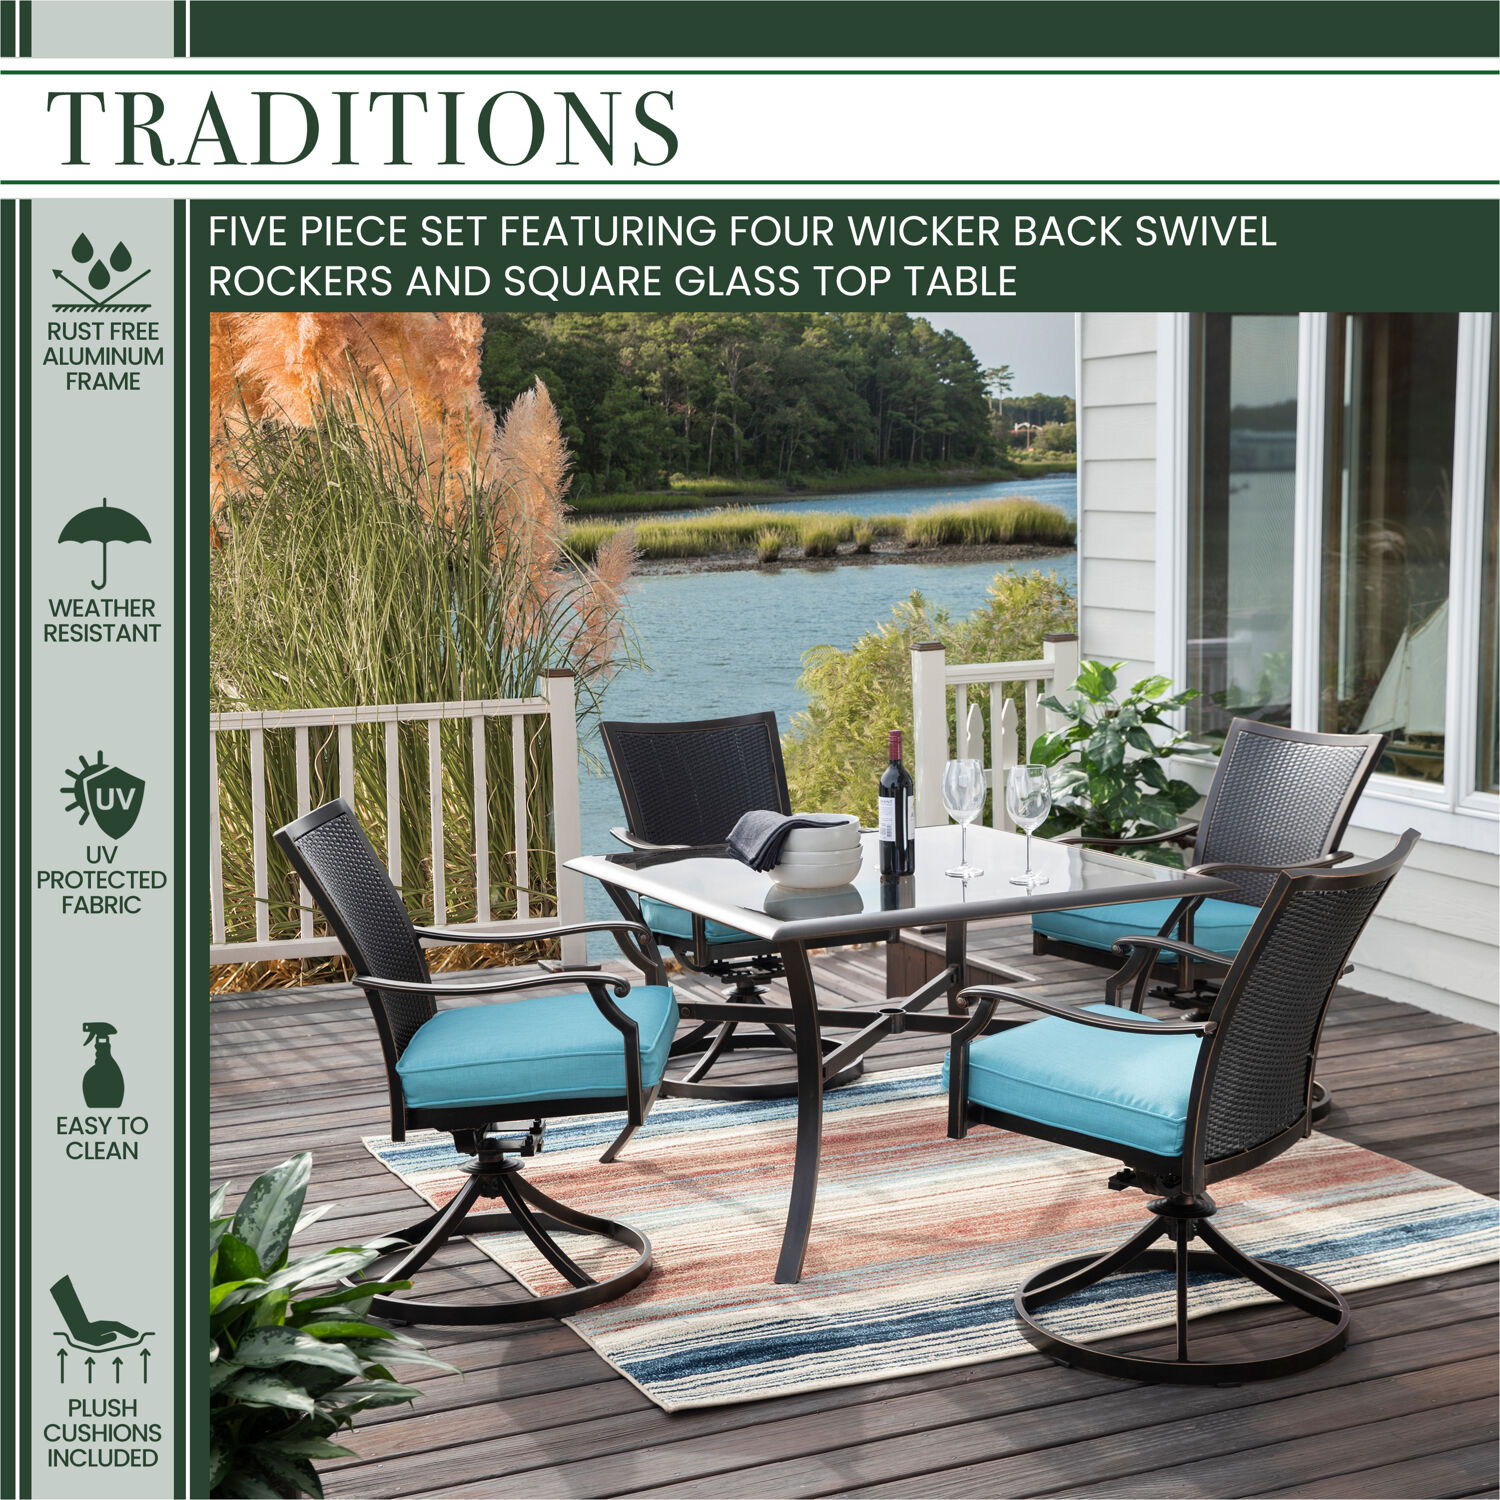 Hanover Traditions 5-Piece Outdoor Dining Set in Blue, 4 Wicker Back Swivel Rockers & 42 in Table - image 3 of 9